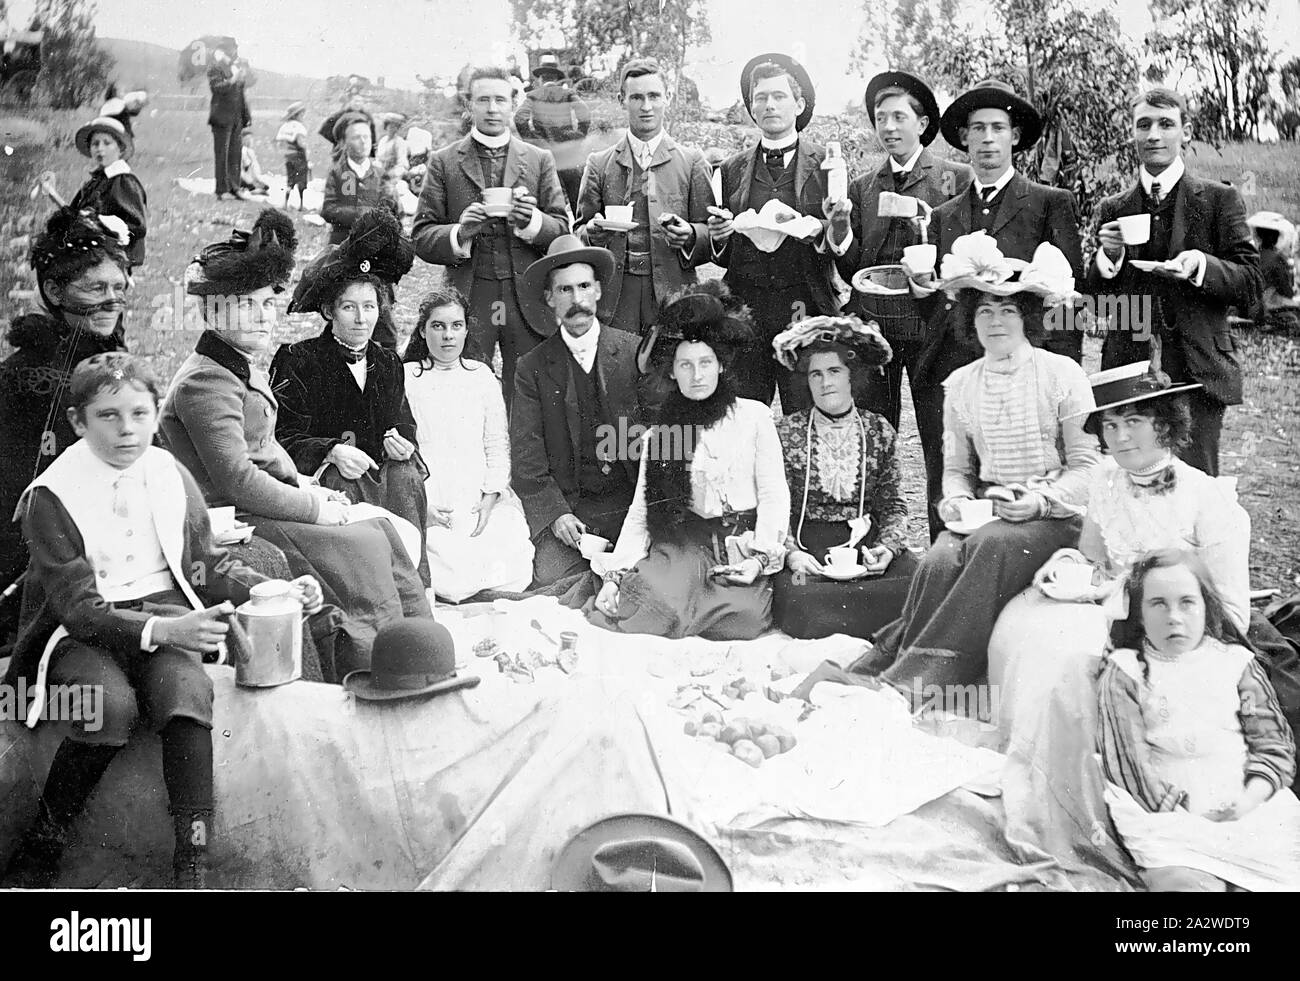 Negative - Lockwood South, Victoria, circa 1902, Members of the Bendigo Fire Brigade and their families at an easter picnic Stock Photo